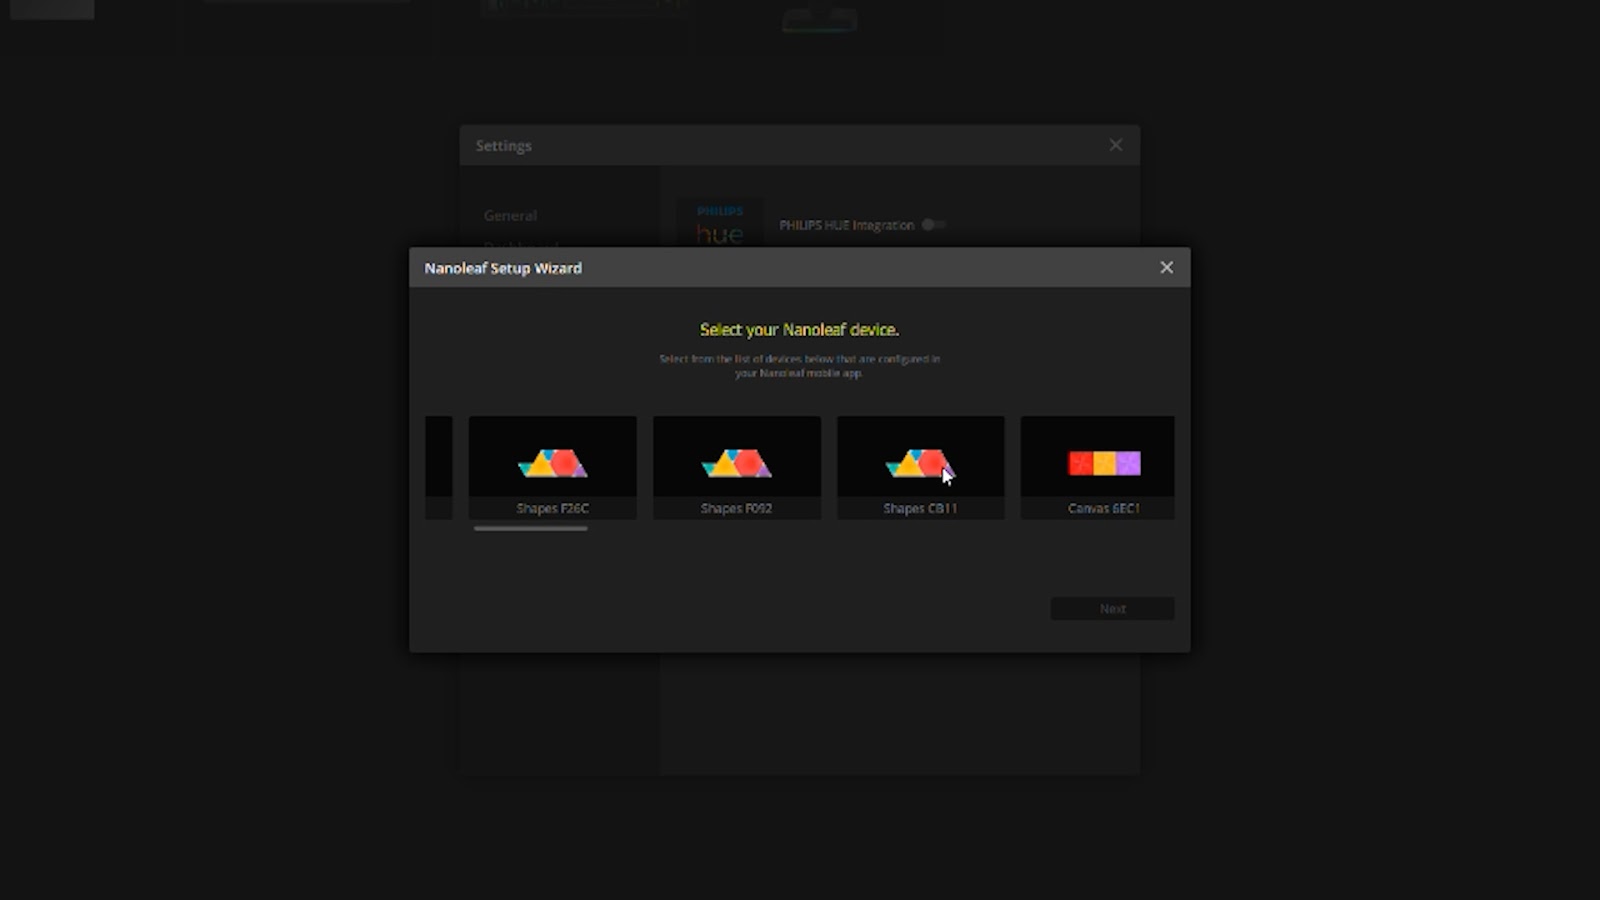 Selecting your Nanoleaf Device while setting up the CORSAIR iCUE integration